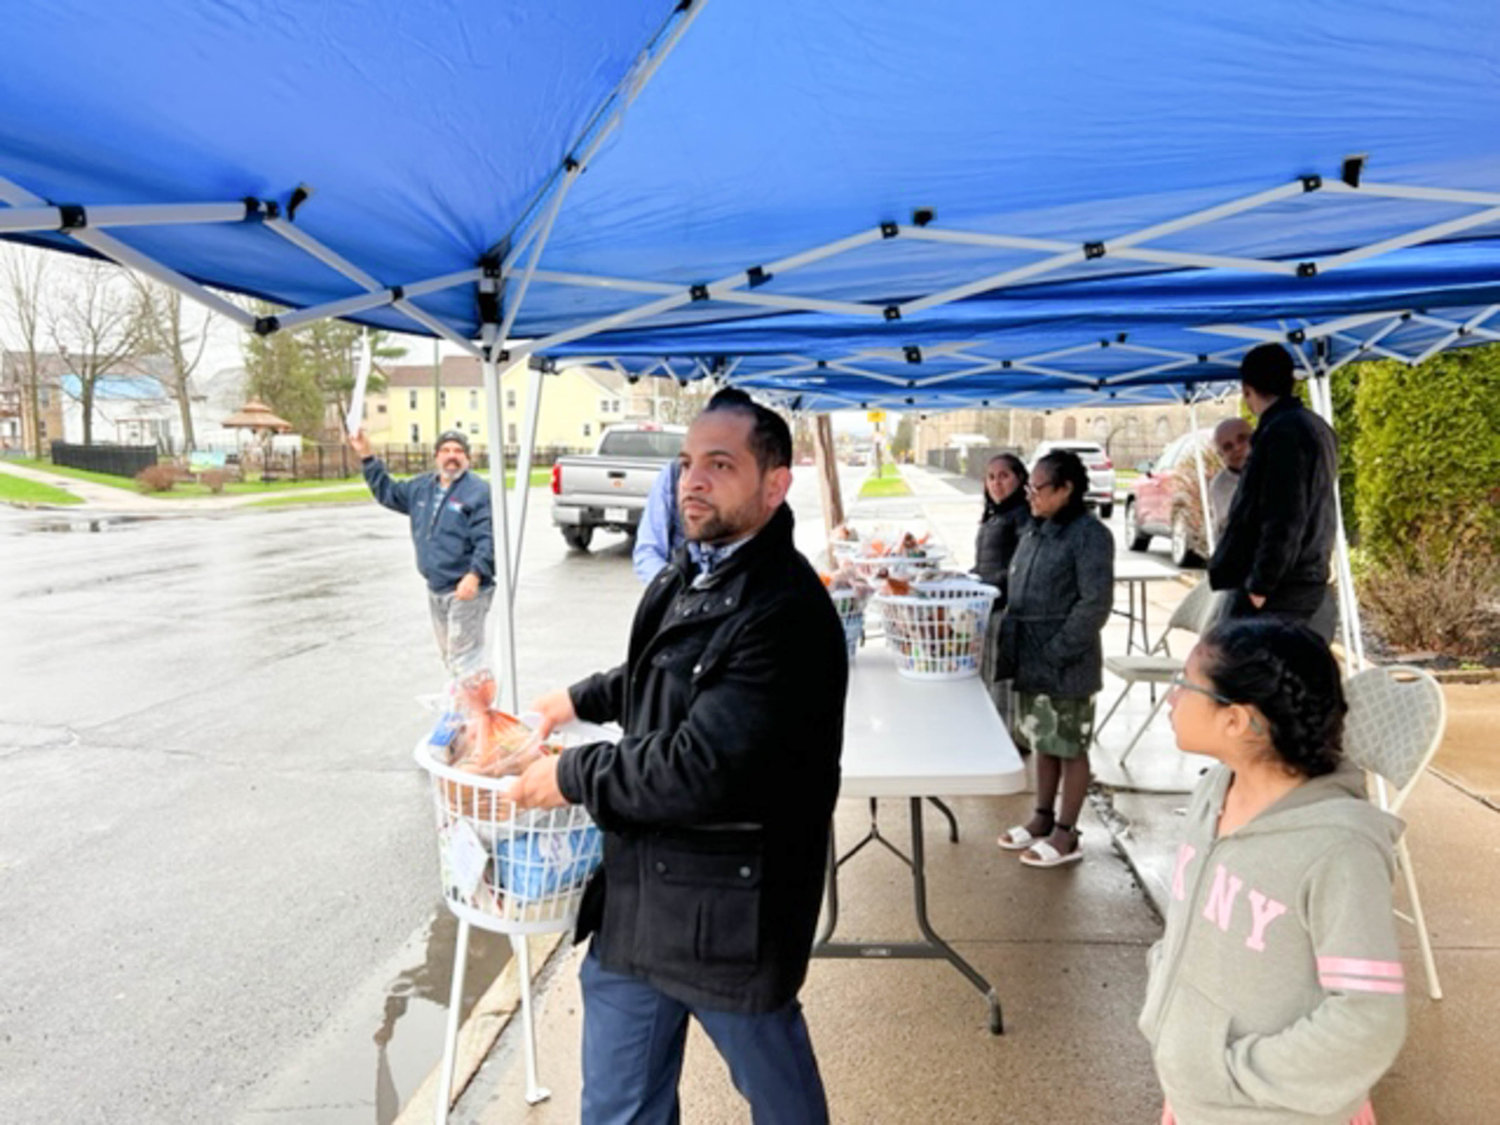 Baskets of food are moved by volunteers and church-goers at the food giveaway organized by four of the Seventh-Day Adventist Churches in the city of Utica.